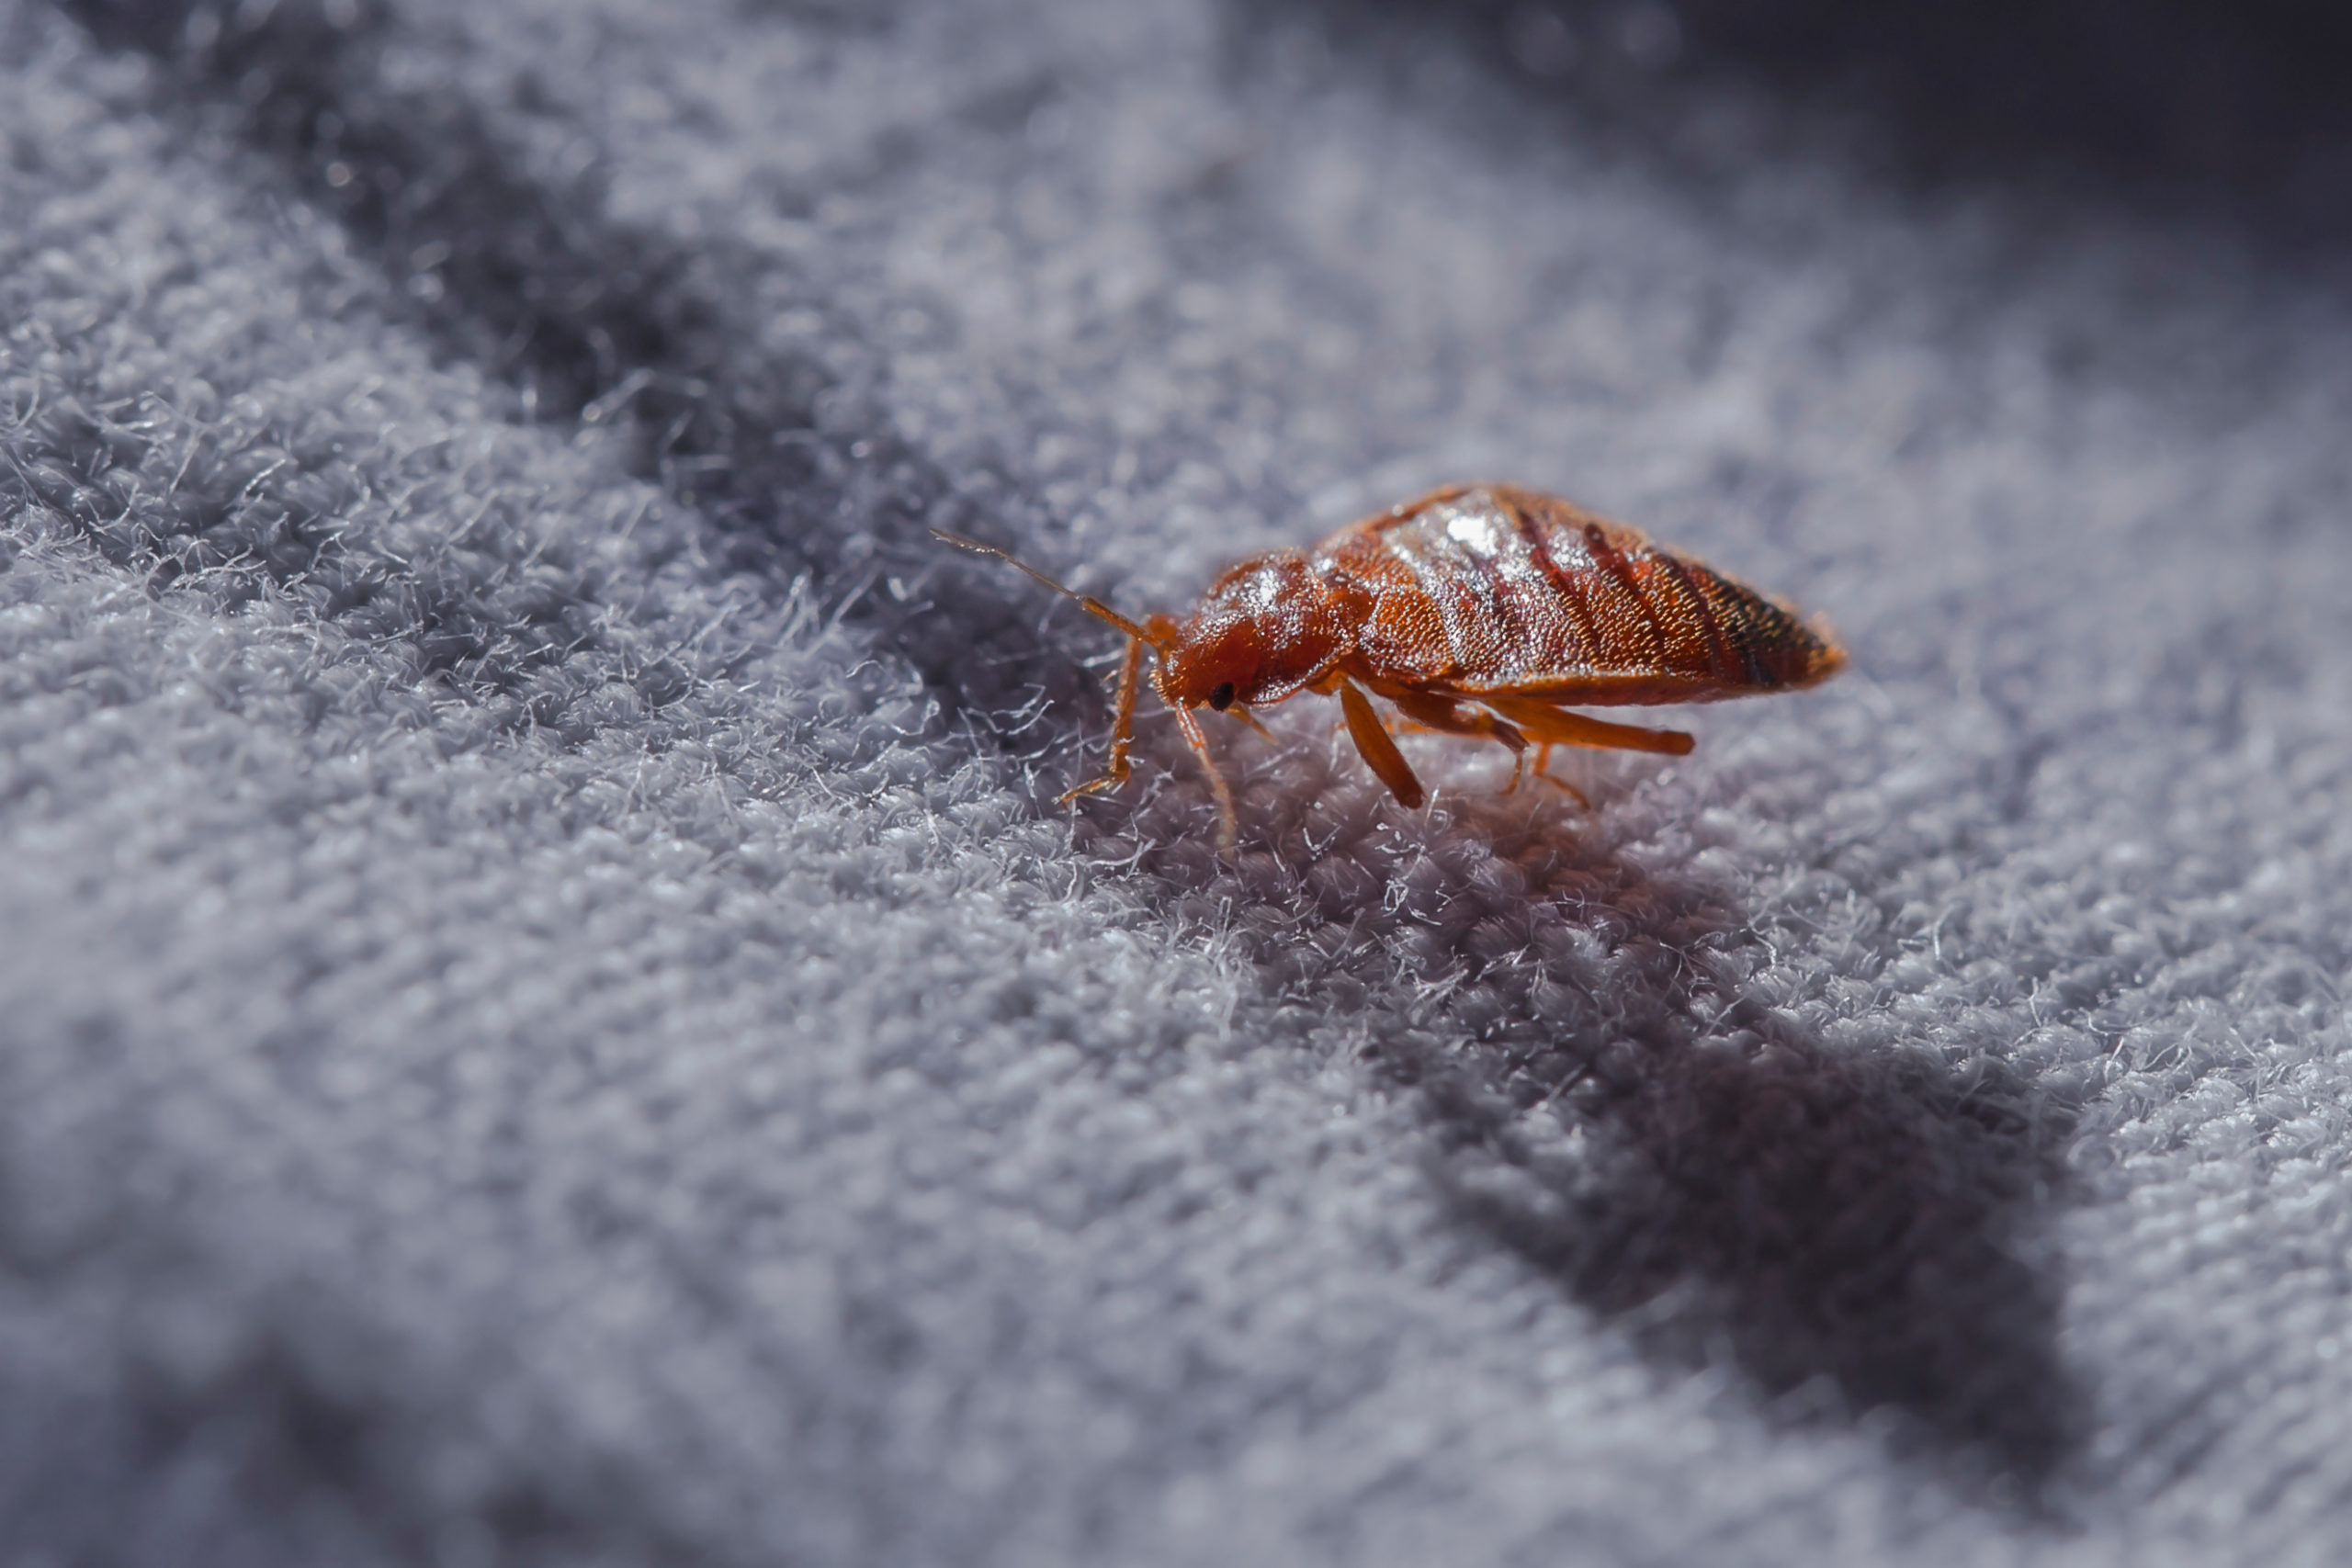 Bed bug Cimex lectularius at night in the moonlight on a bed lin